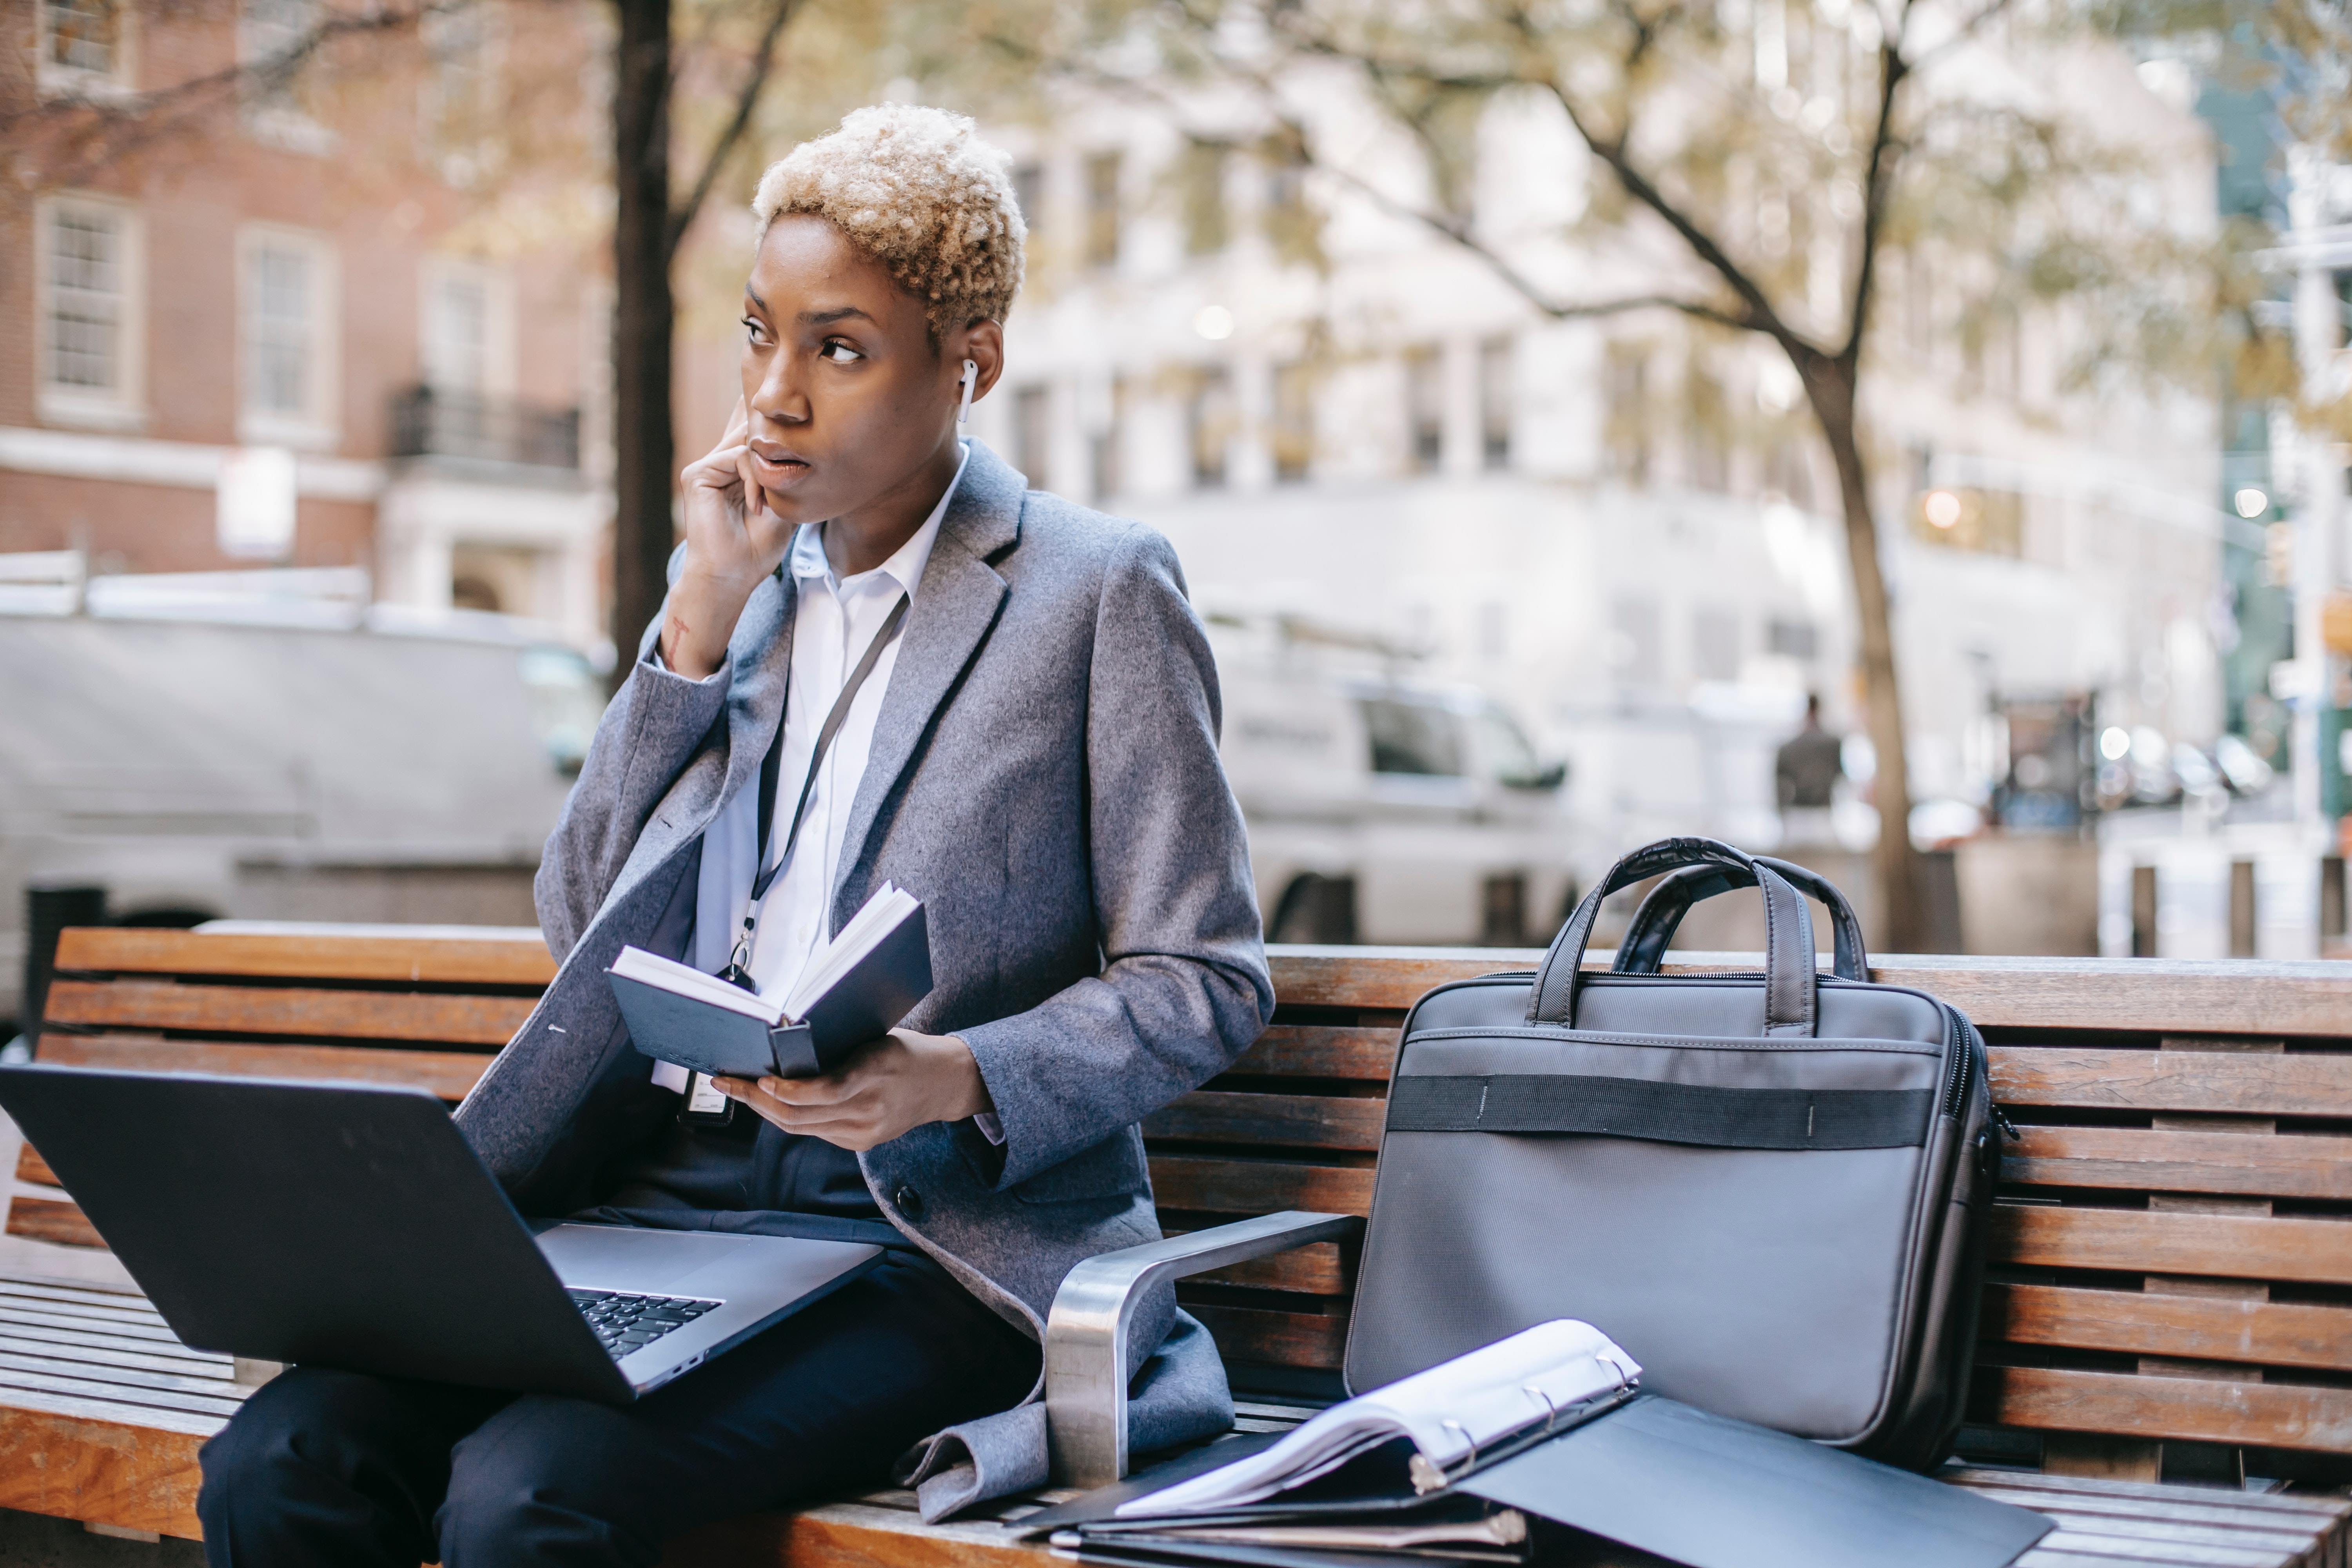 A Black woman seated on a bench with a laptop, cell phone, brief case, and binder